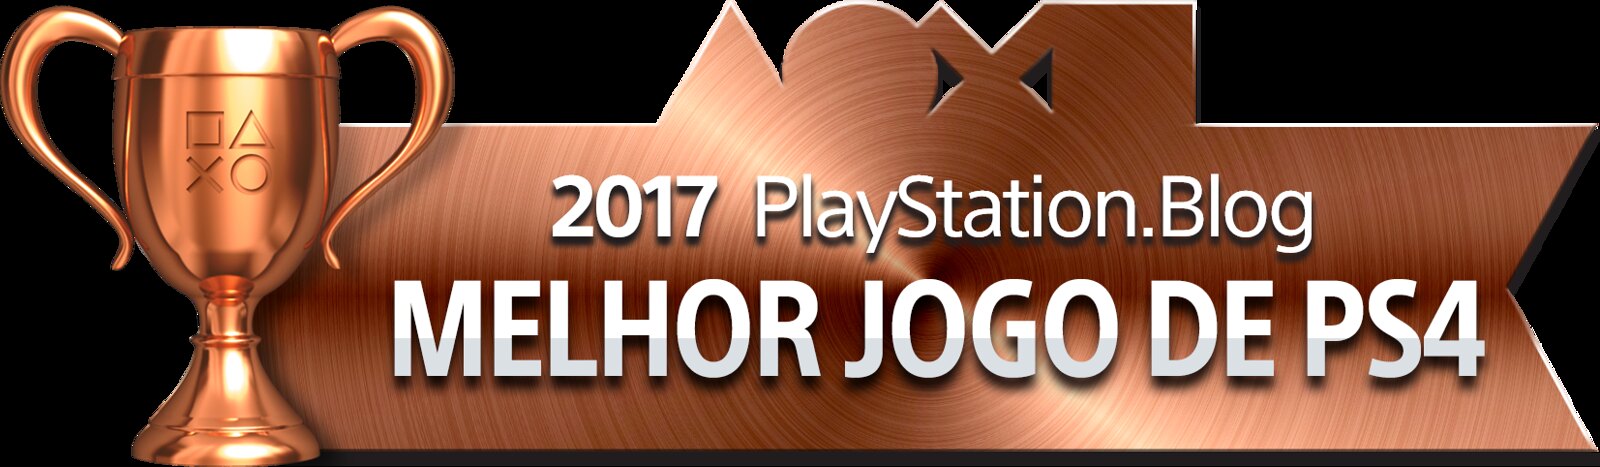 PlayStation Blog Game of the Year 2017 - Best PS4 Game (Bronze)